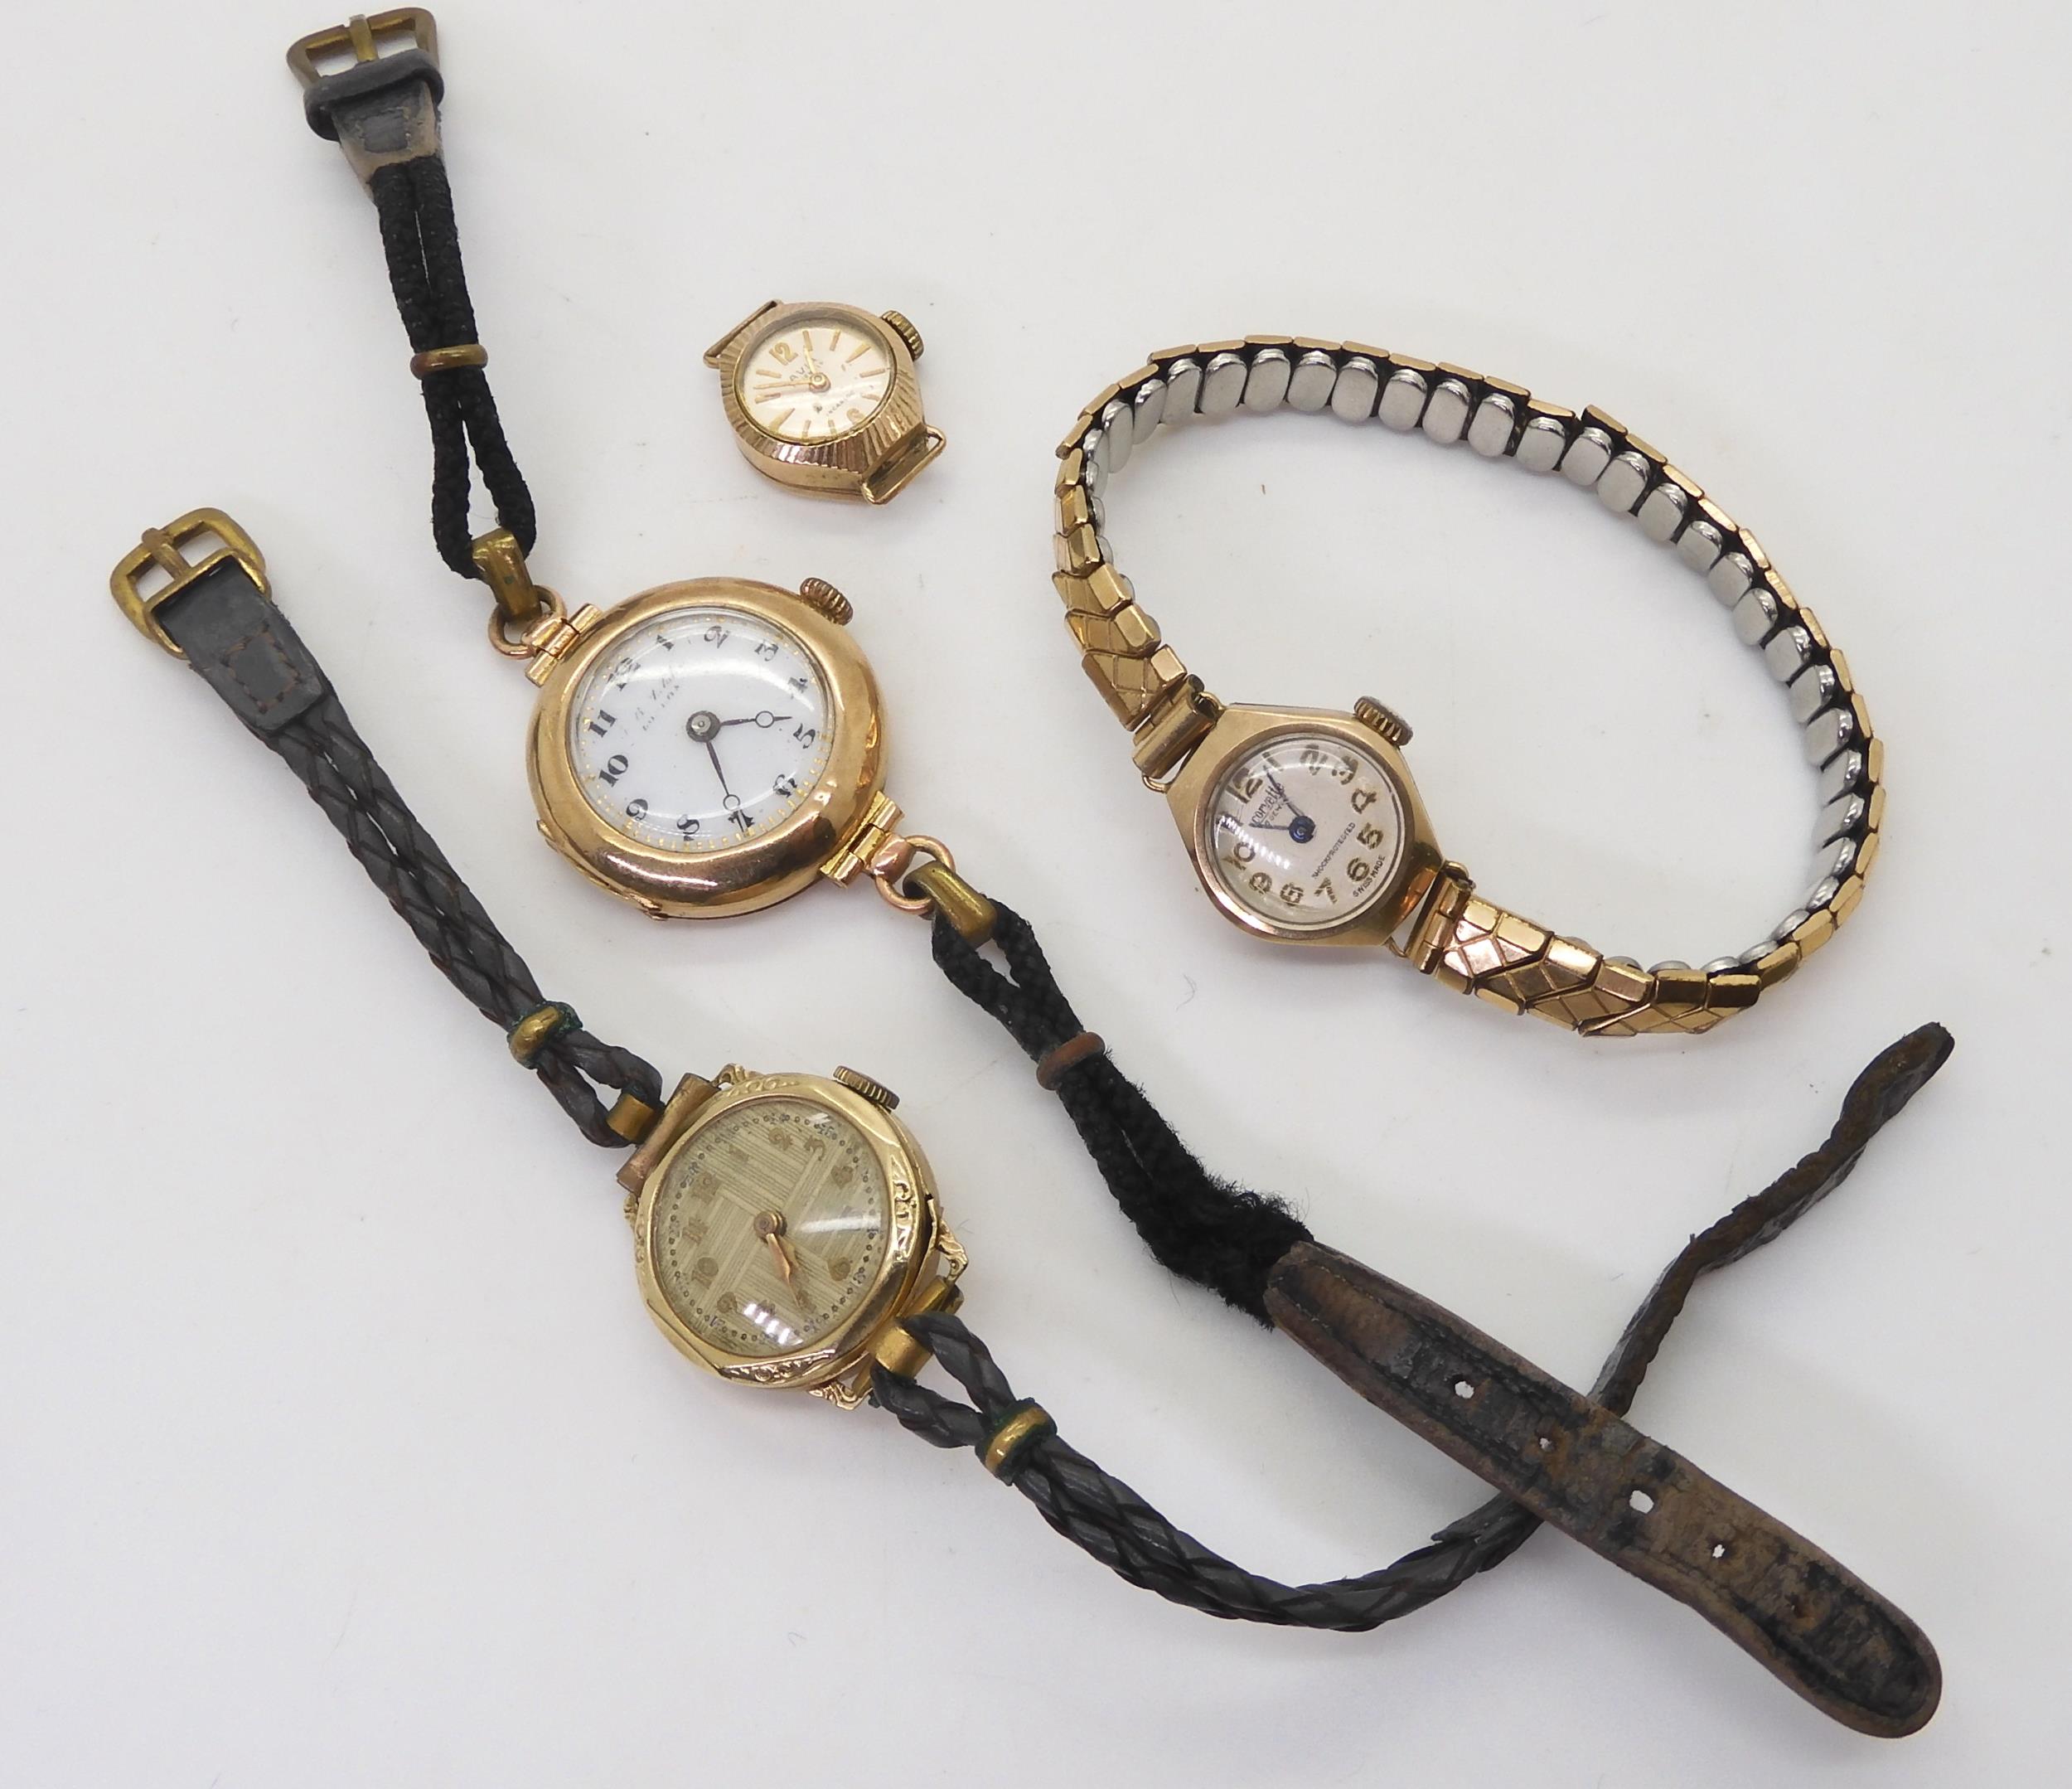 A 14k gold cased ladies watch with leather strap, weight together including mechanism 14gms, and - Image 2 of 5